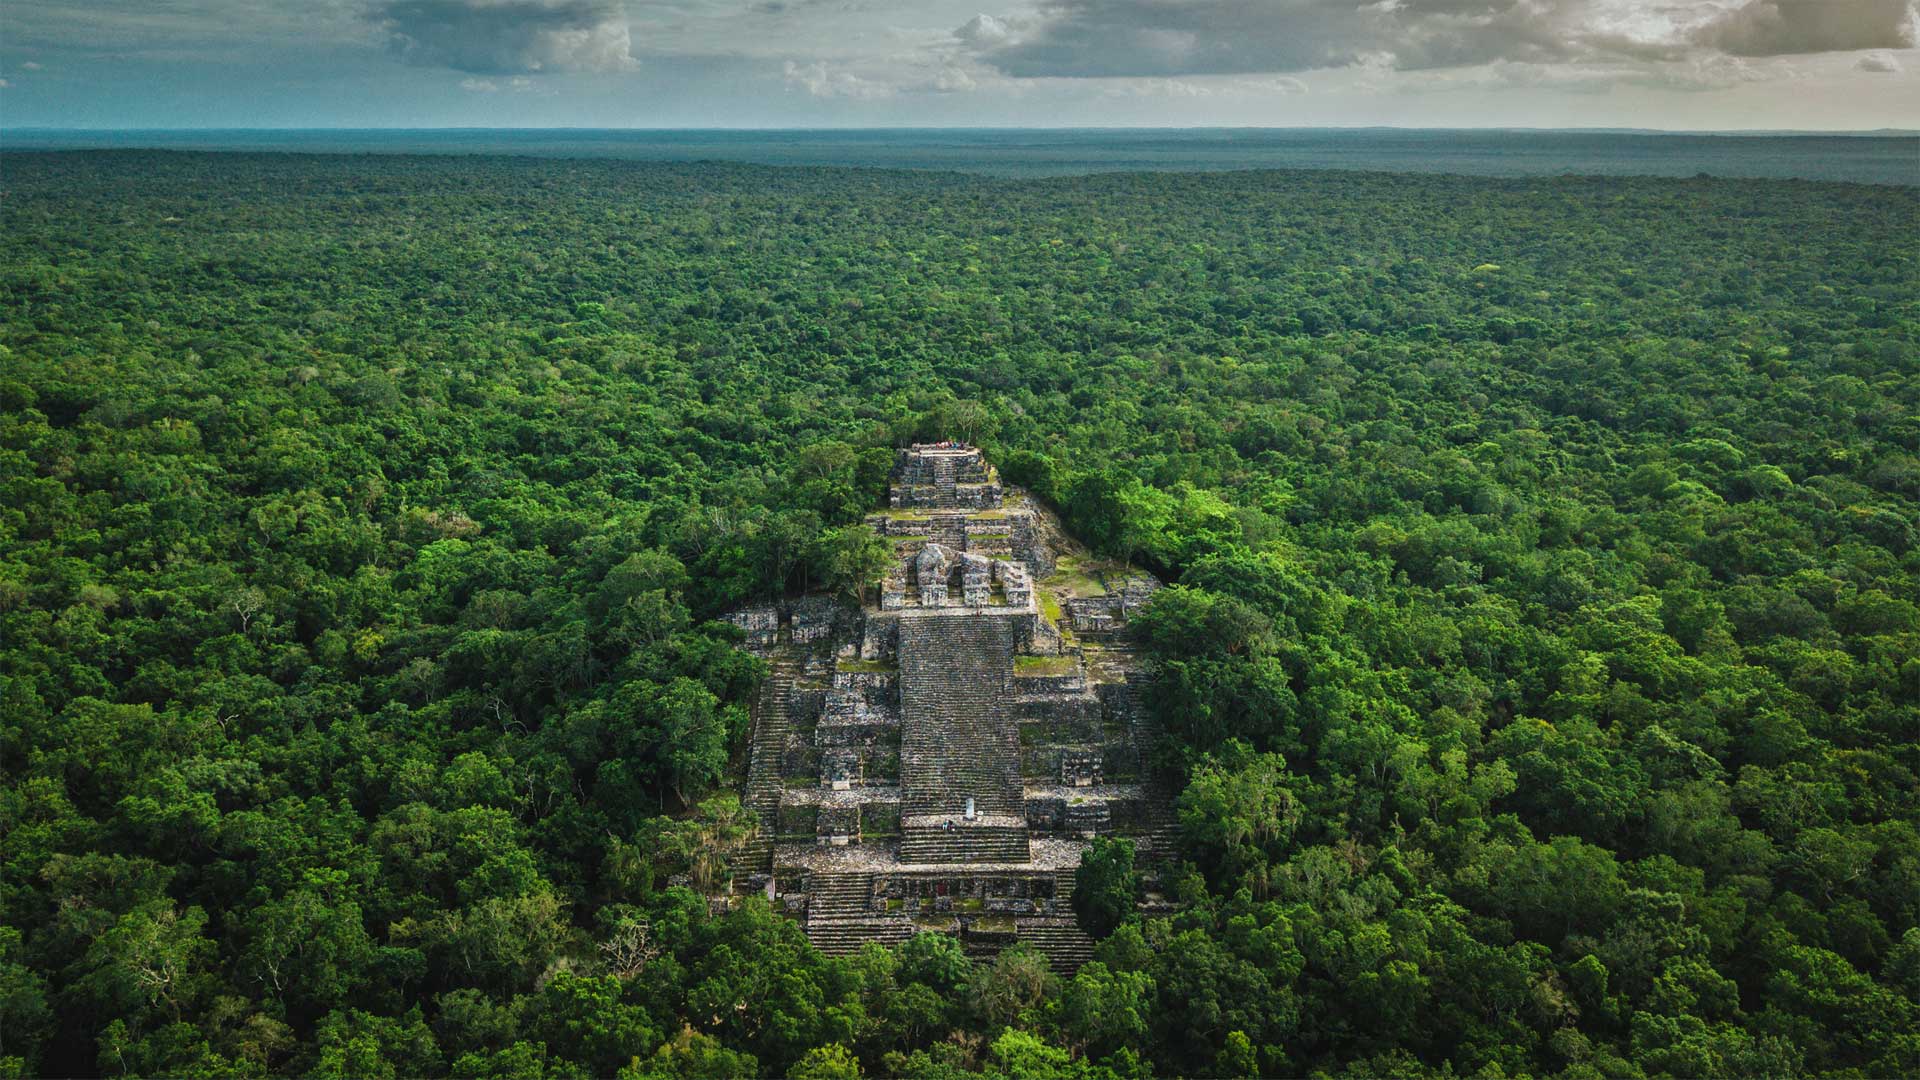 Ruins of the ancient Maya city of Calakmul surrounded by jungle in Campeche, Mexico - Alfredo Matus/Shutterstock)